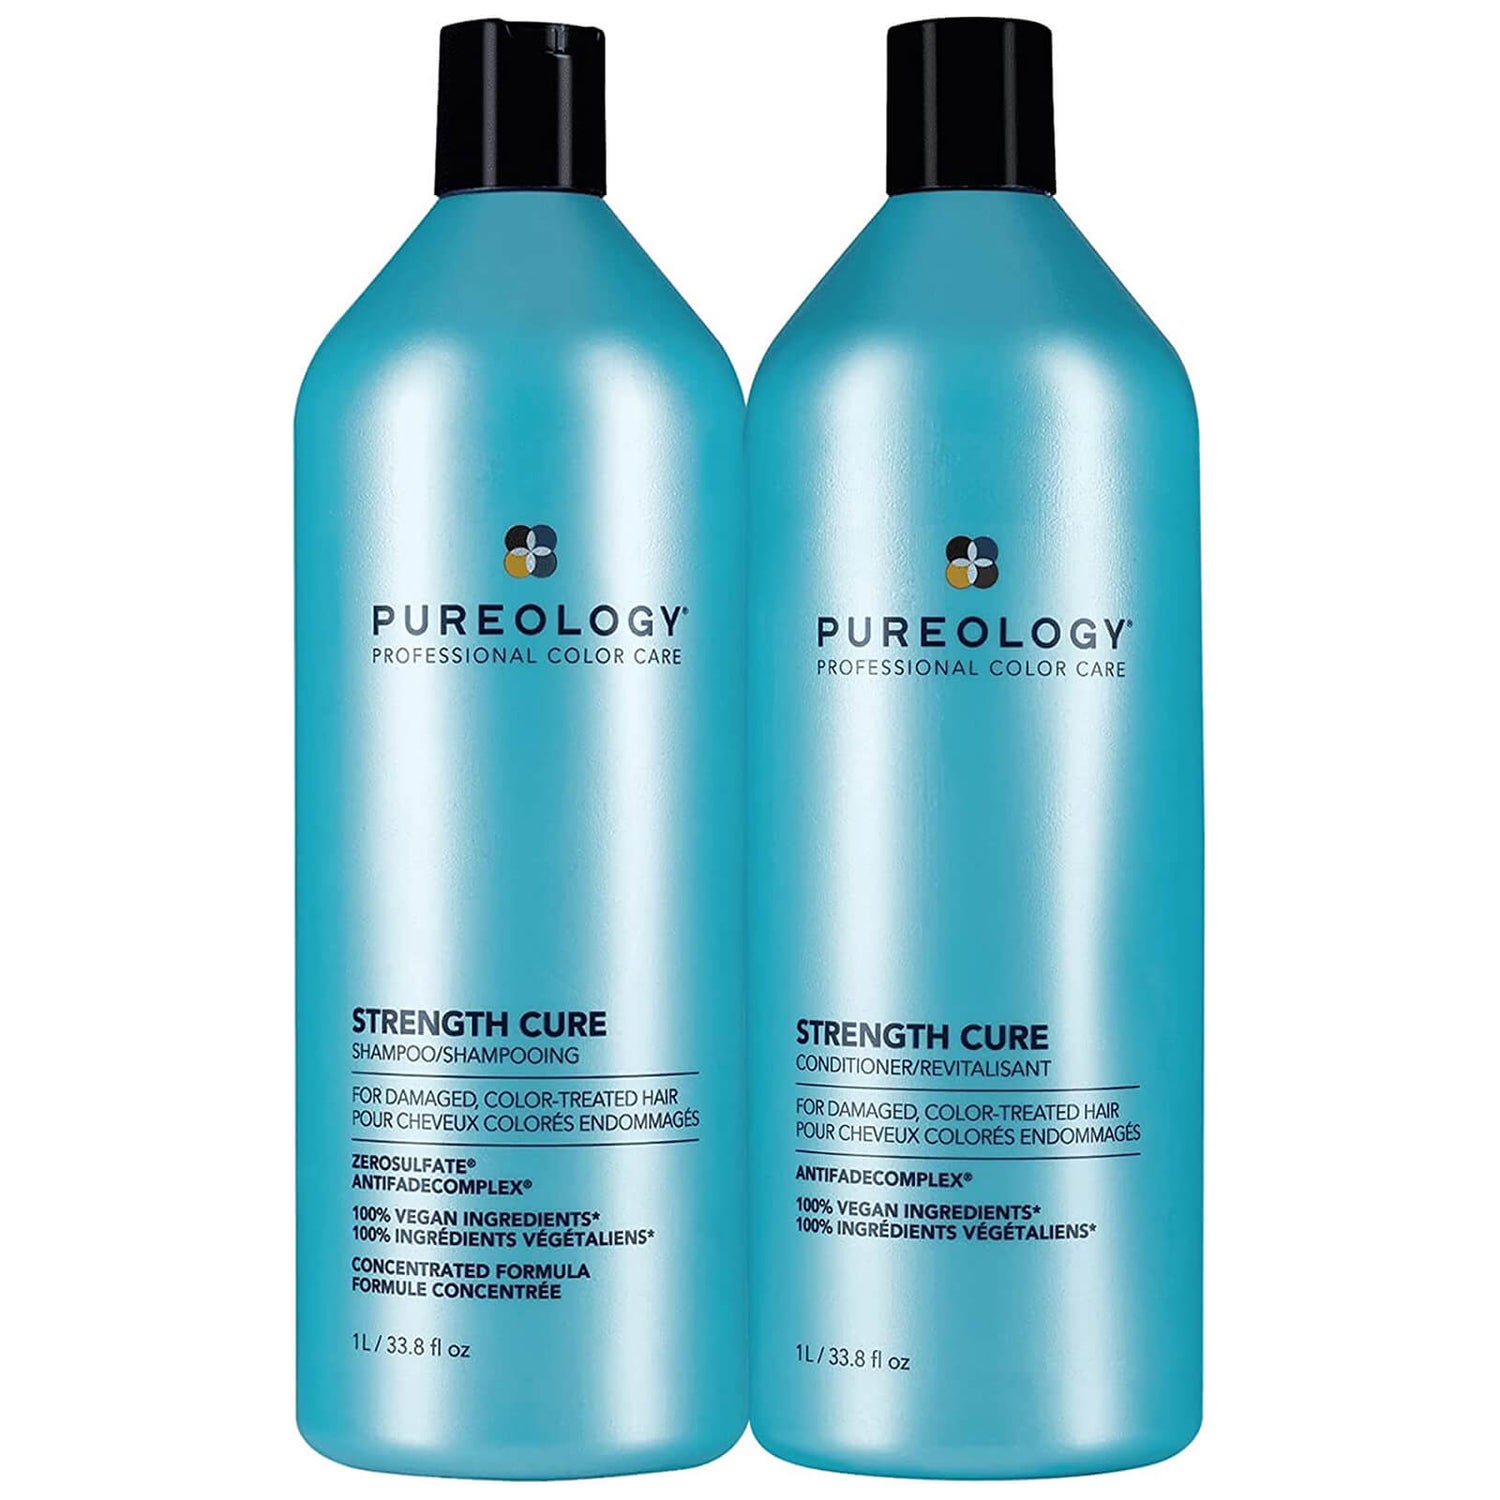 Pureology Strength Cure Pureology Supersize Duo